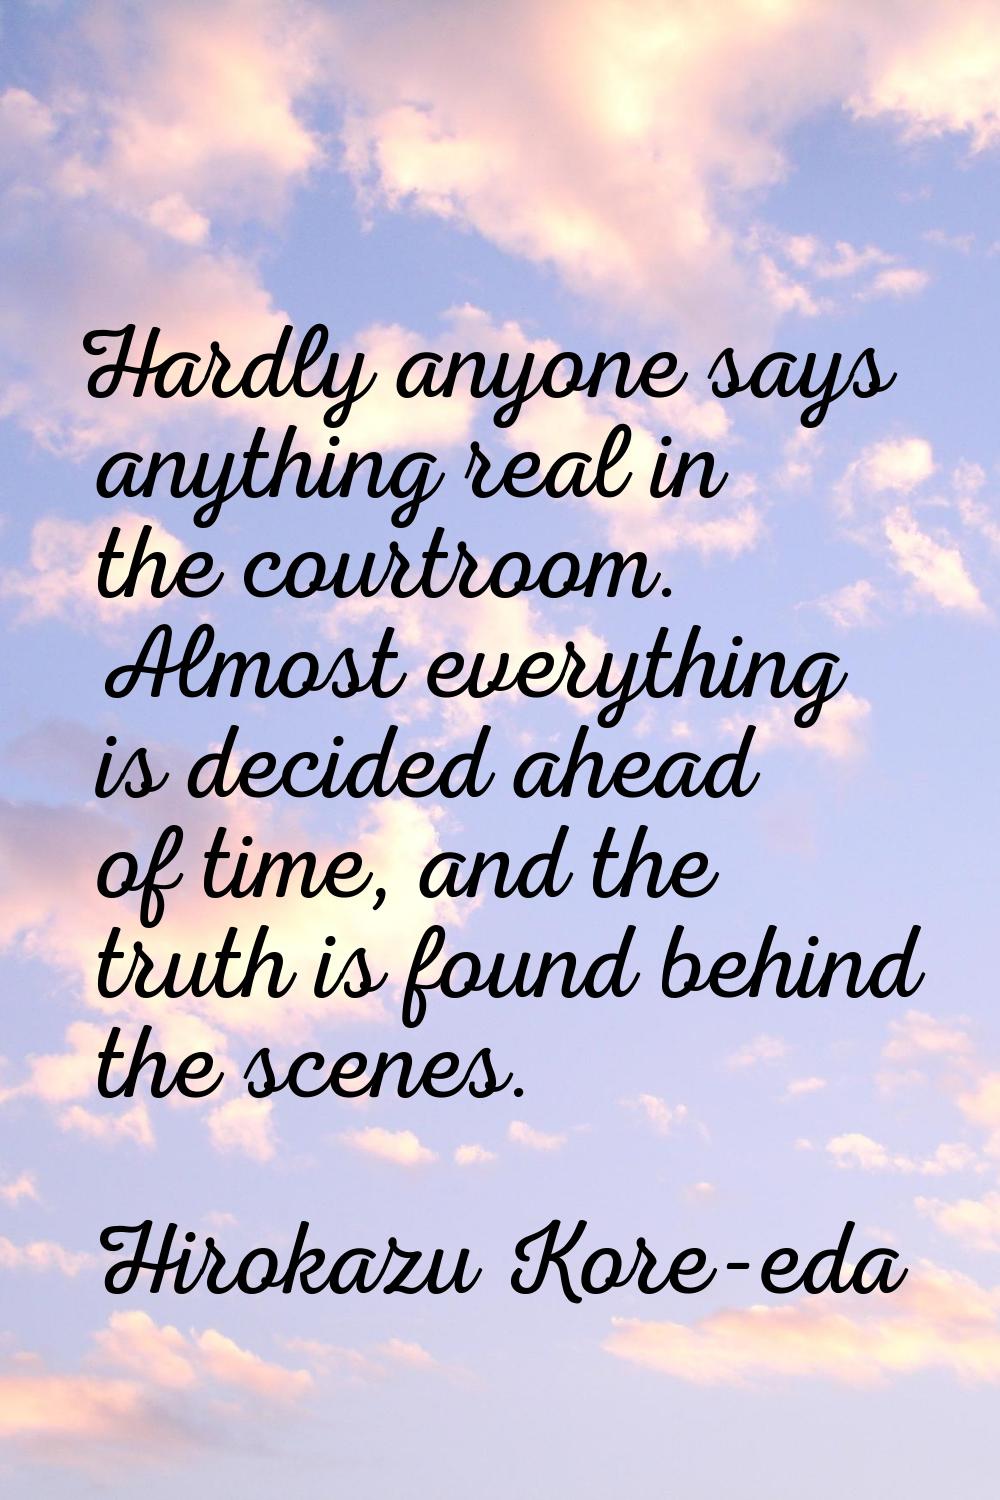 Hardly anyone says anything real in the courtroom. Almost everything is decided ahead of time, and 